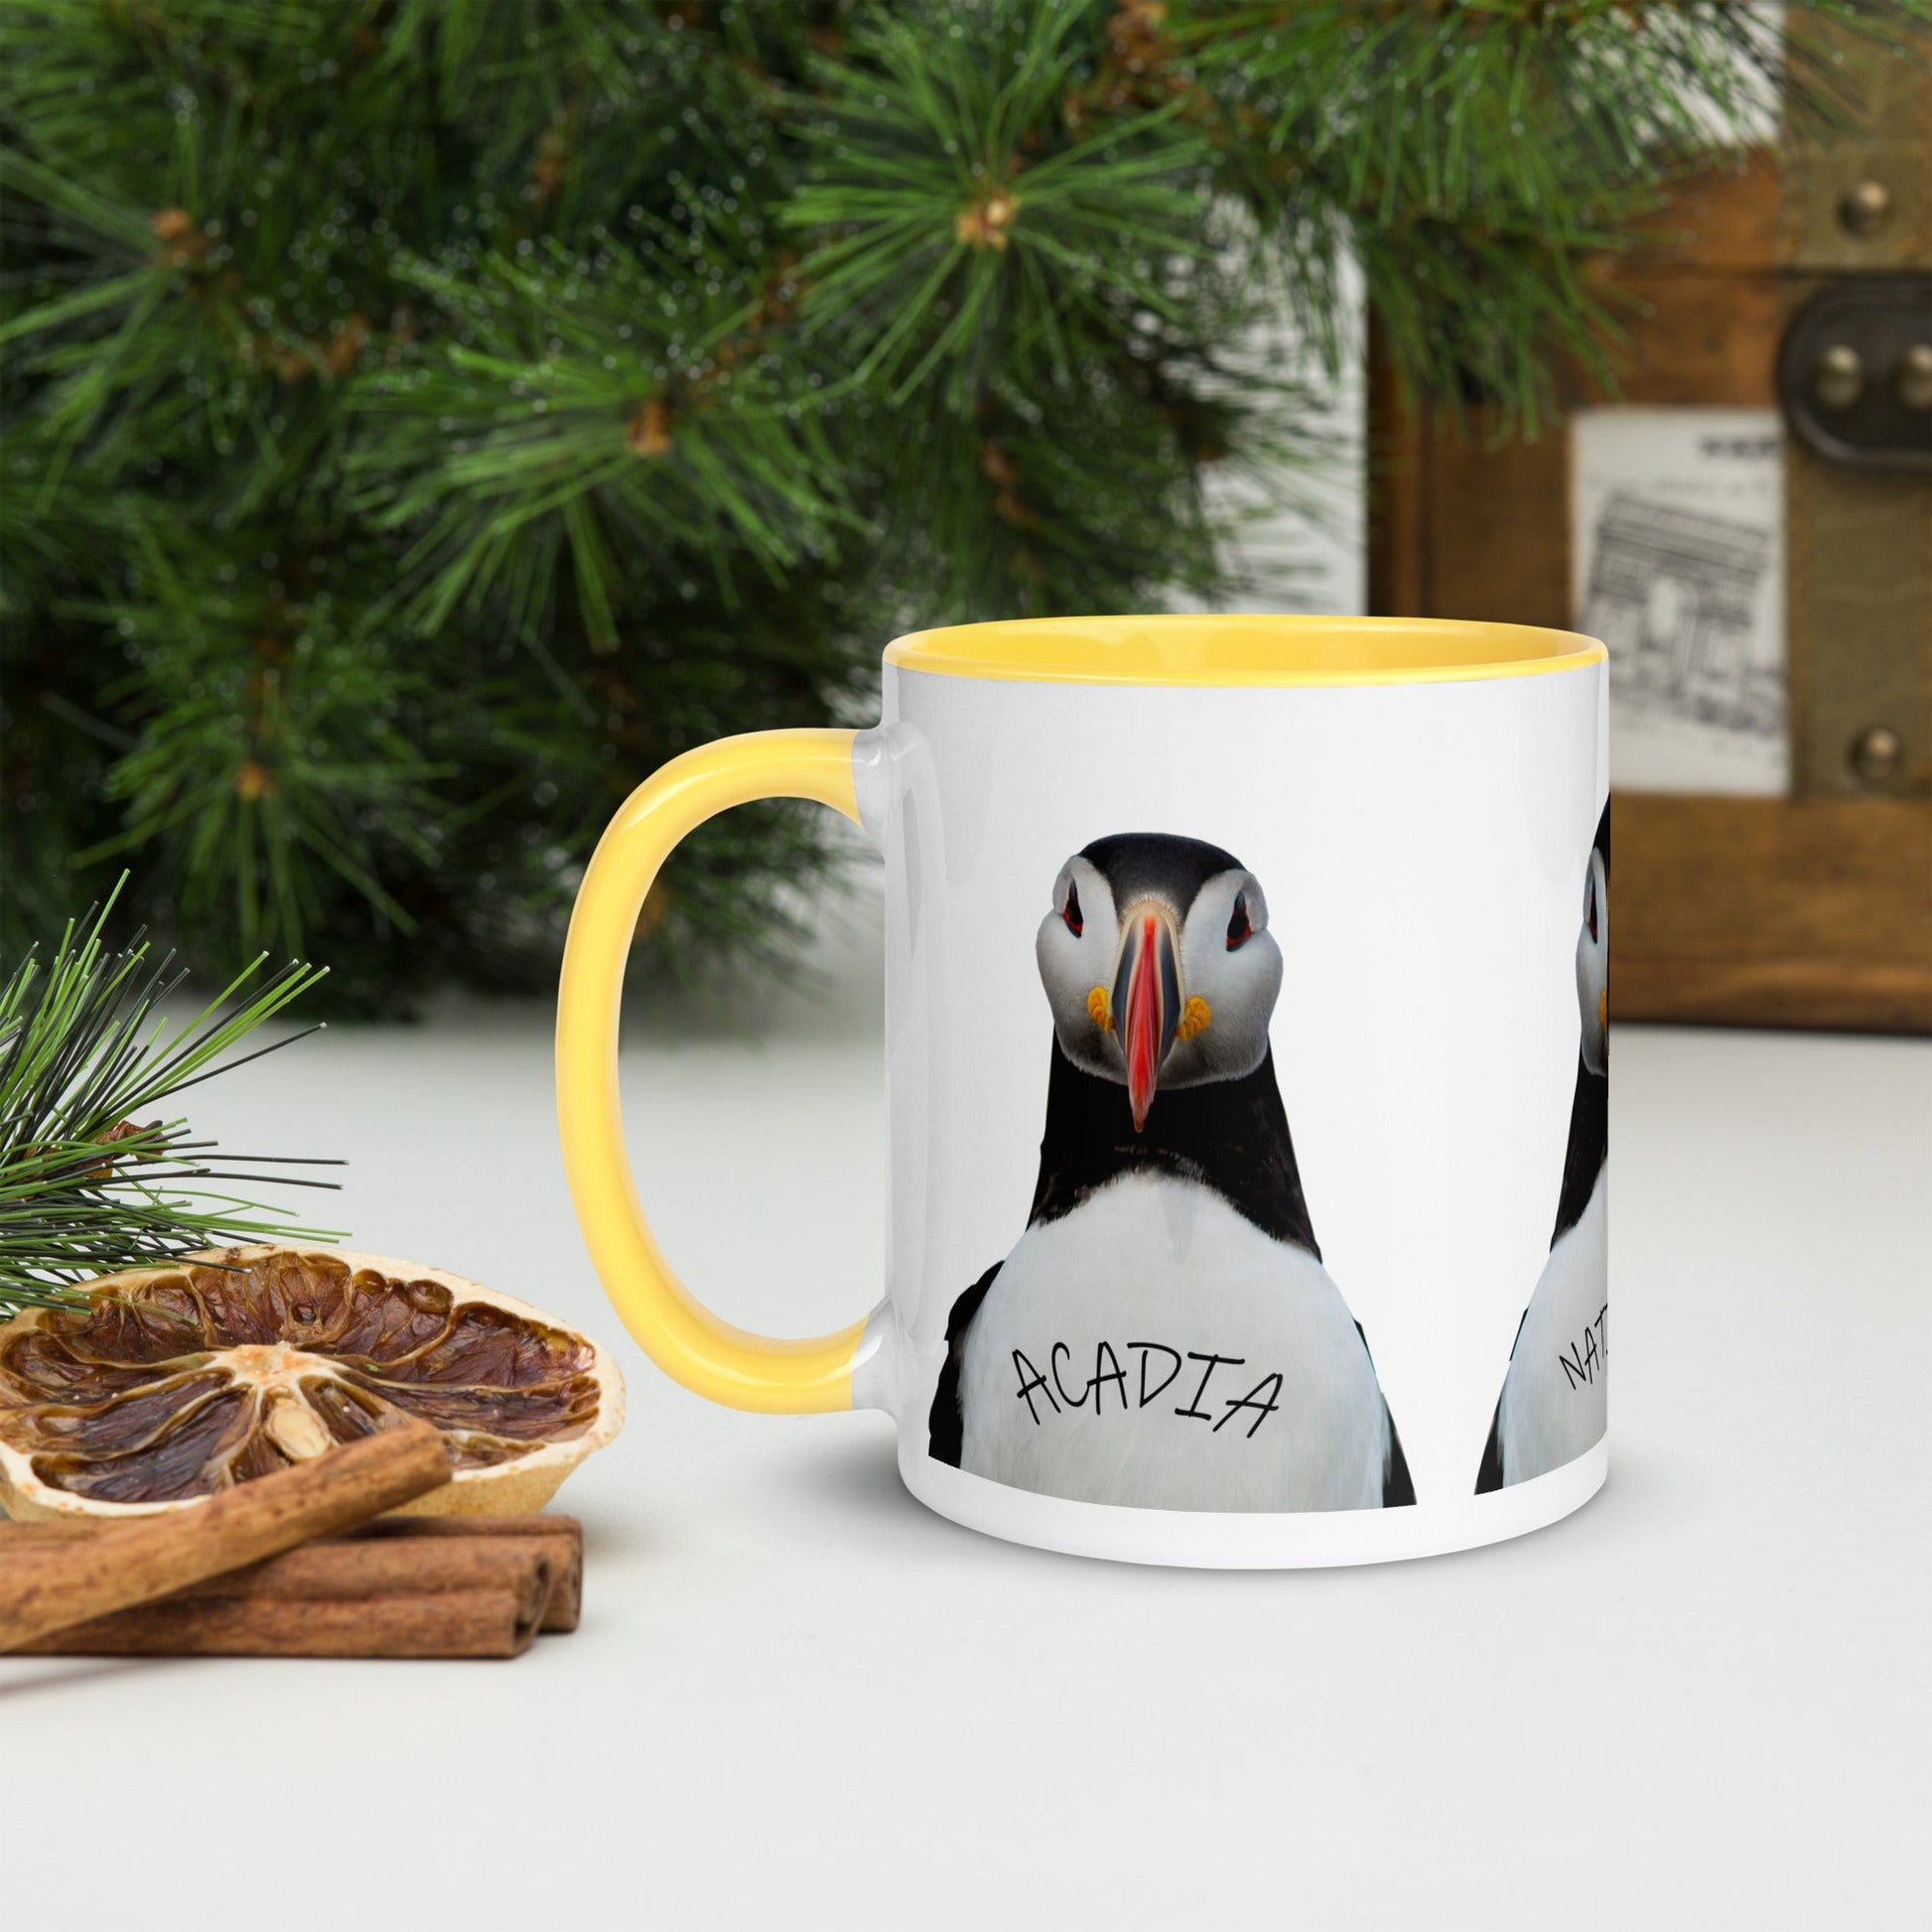 Acadia Park Puffin Mug with Color Inside